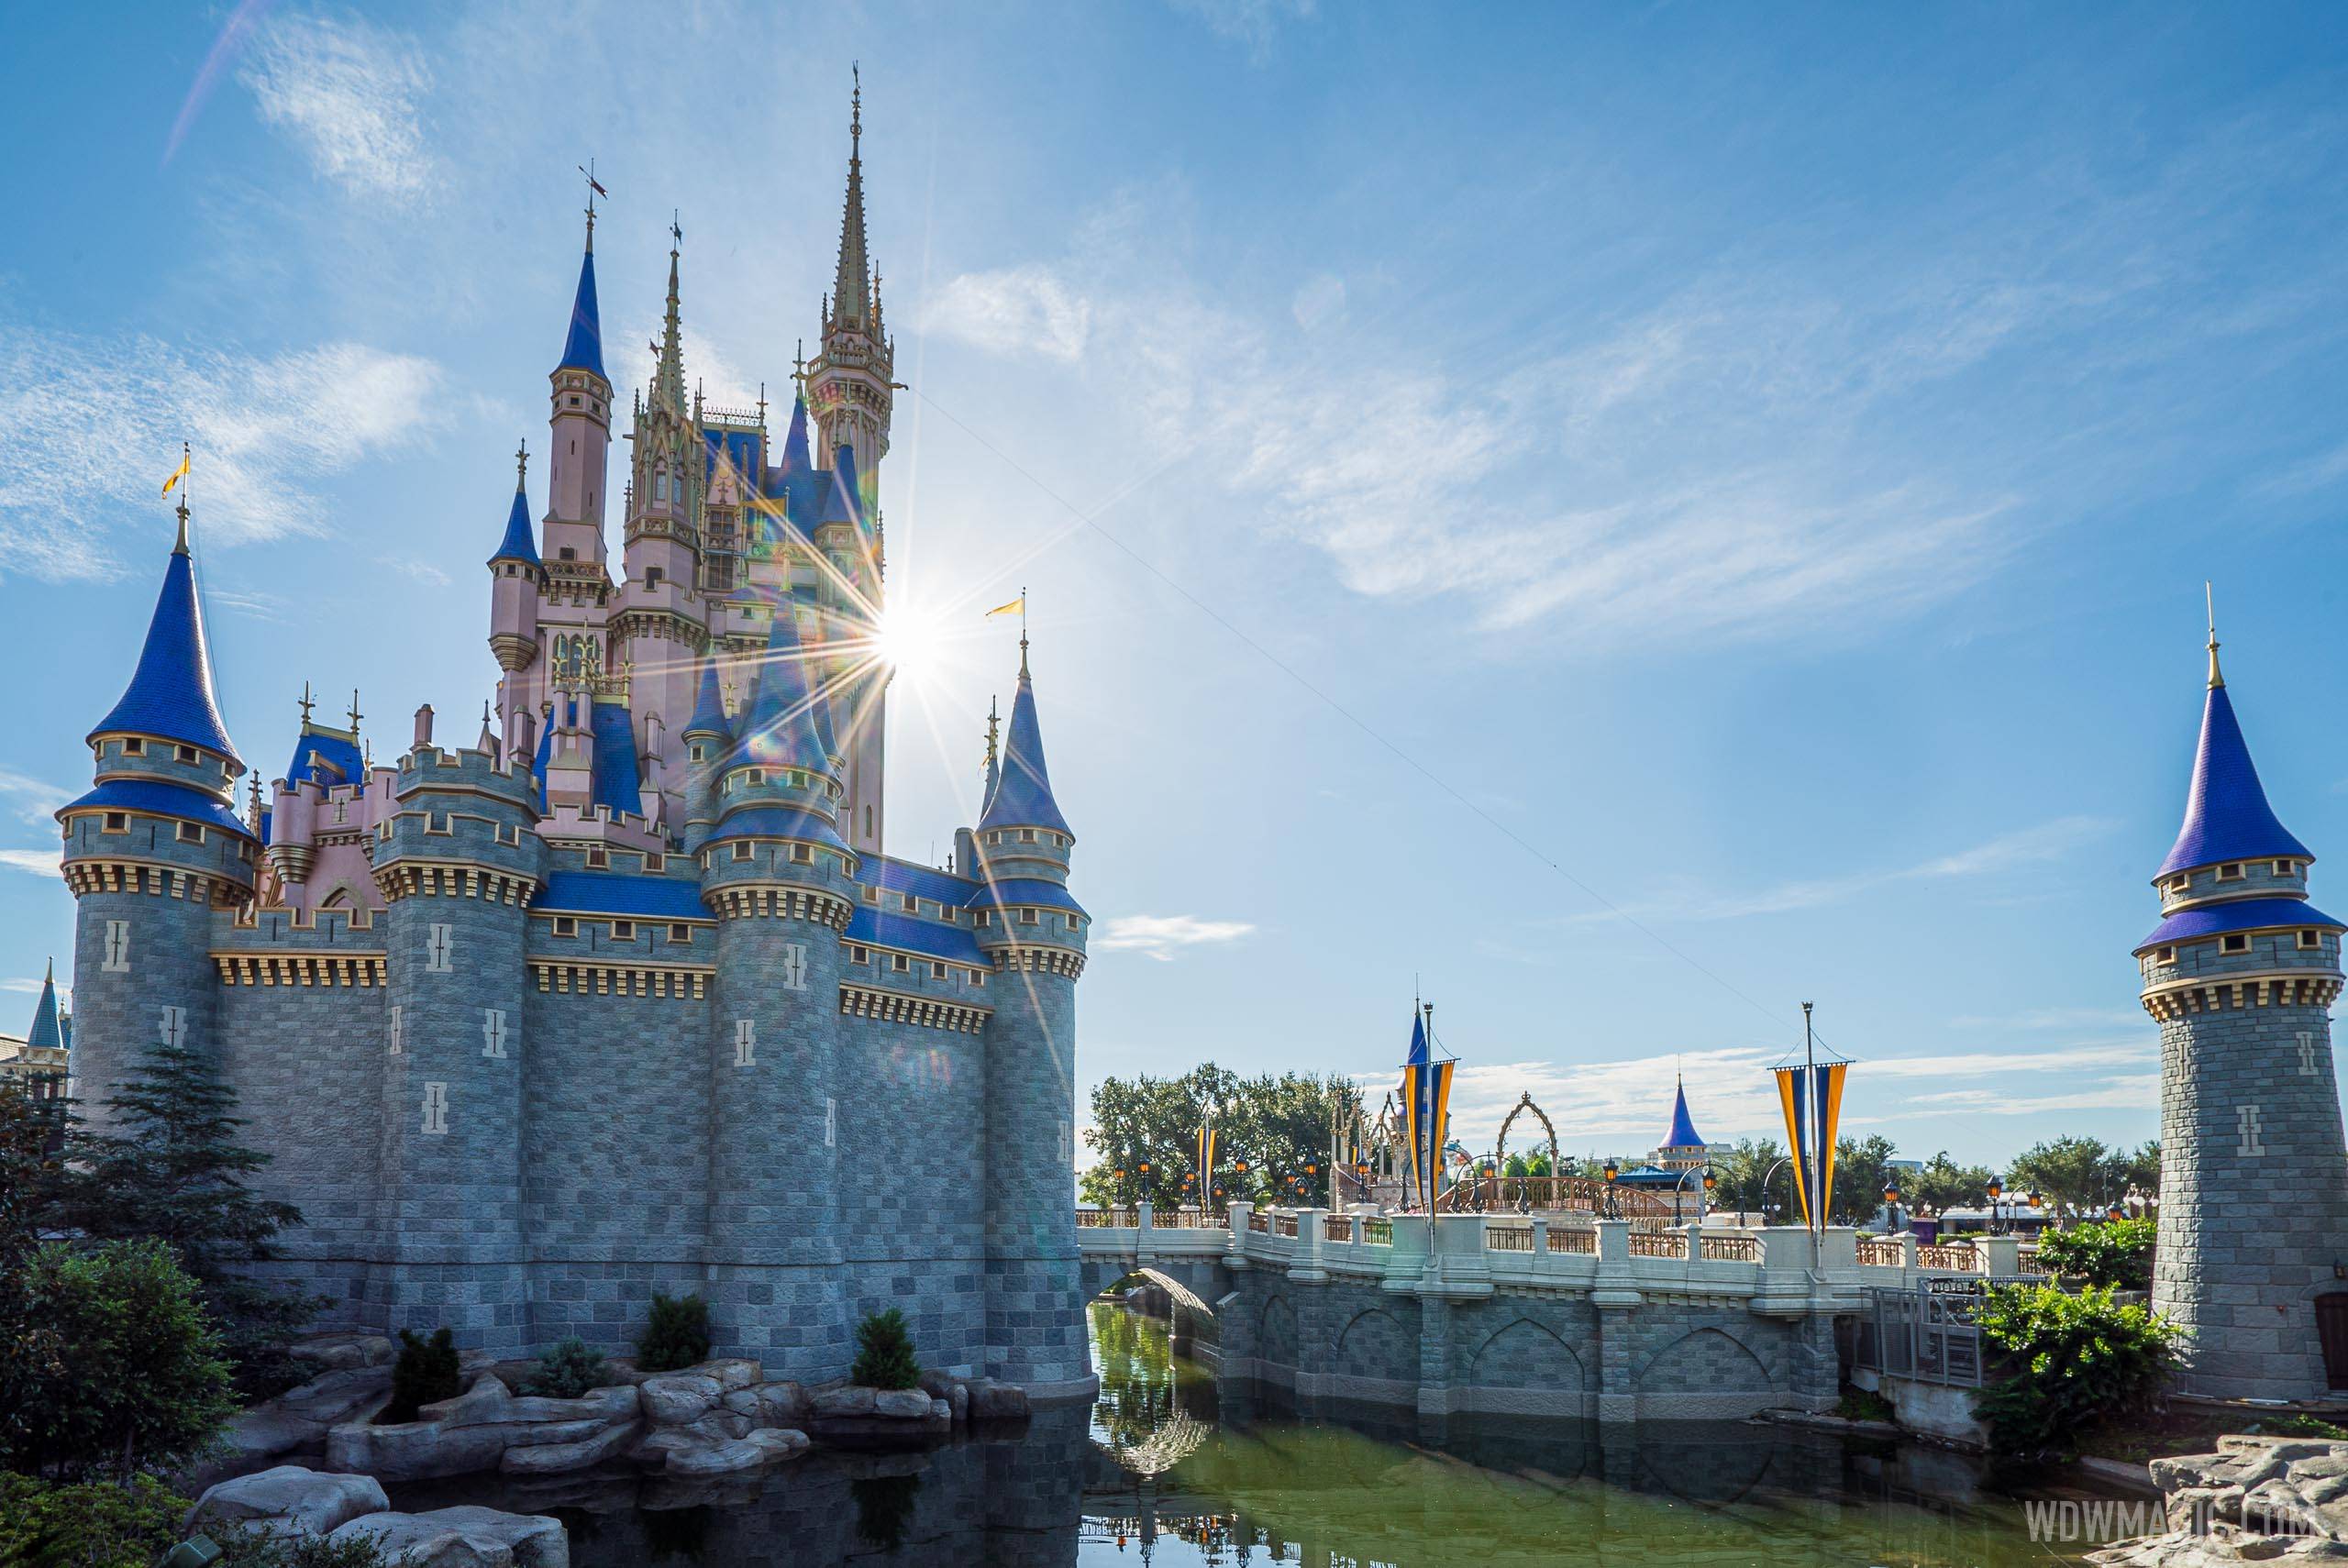 Magic Kingdom will be open for 2 hours longer than originally scheduled